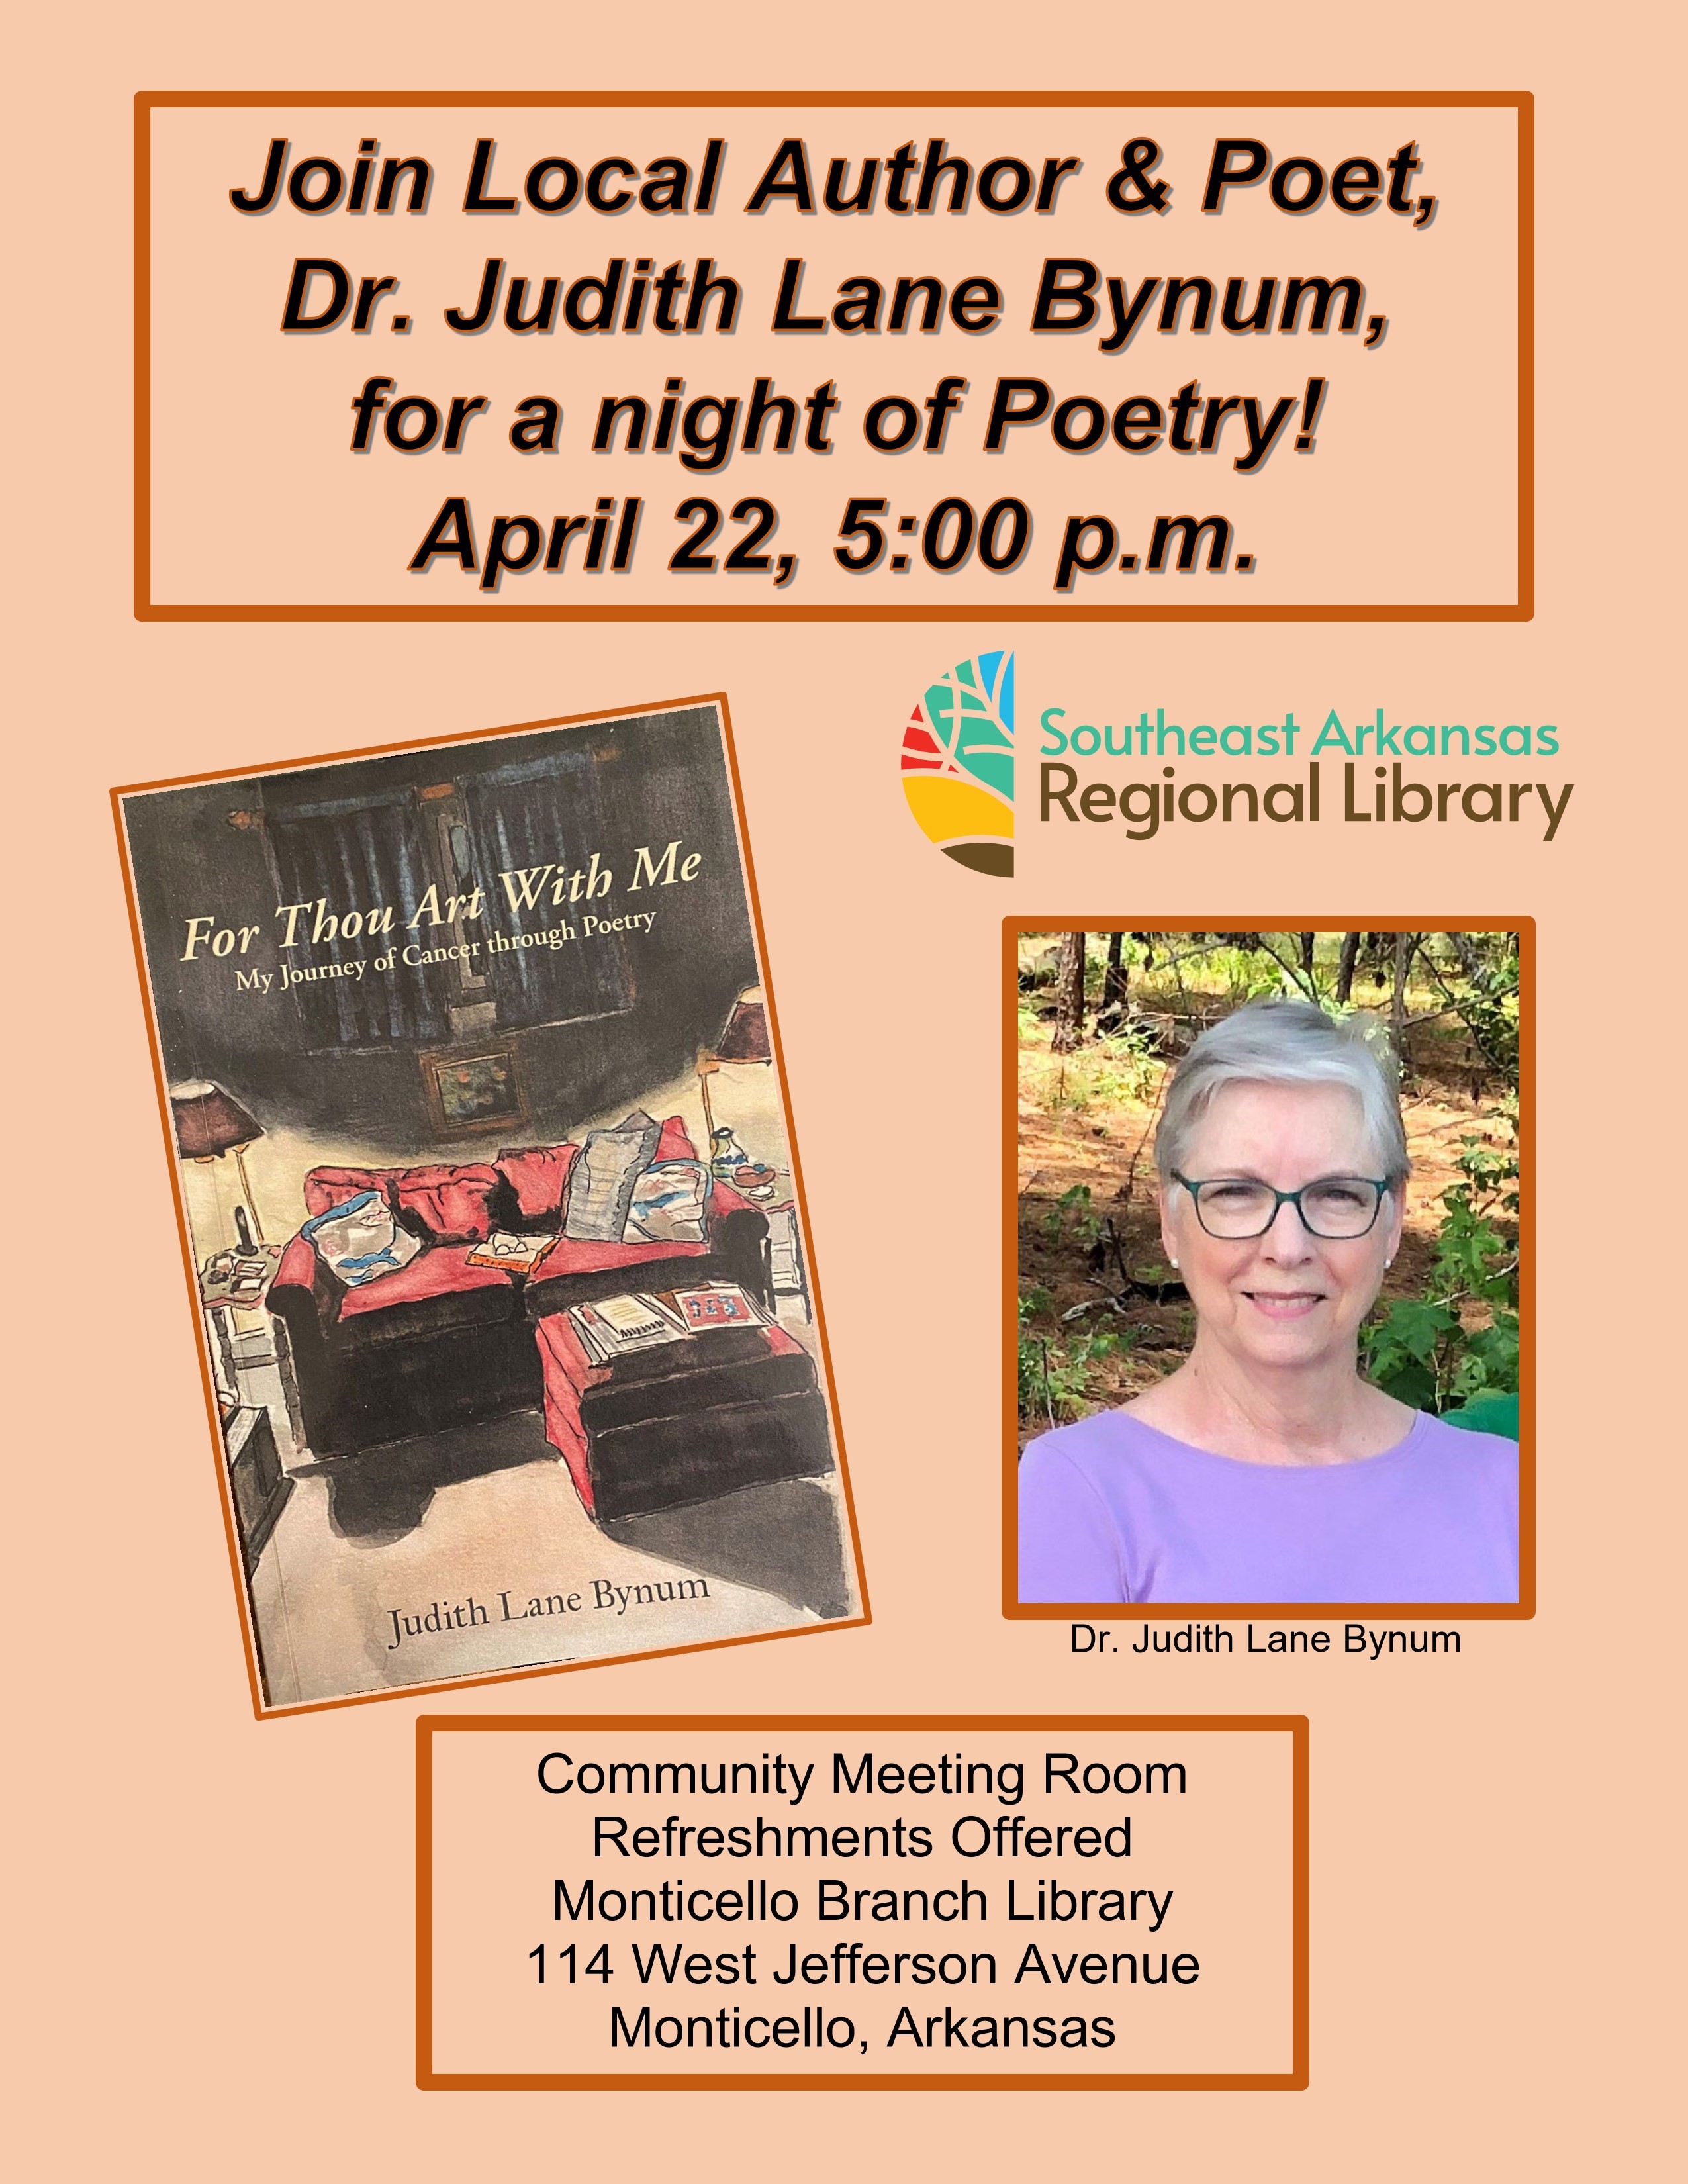 Judy Bynum meet and greet at Monticello Library April 22, 2022 at 5:00 pm Light refreshments will be available.